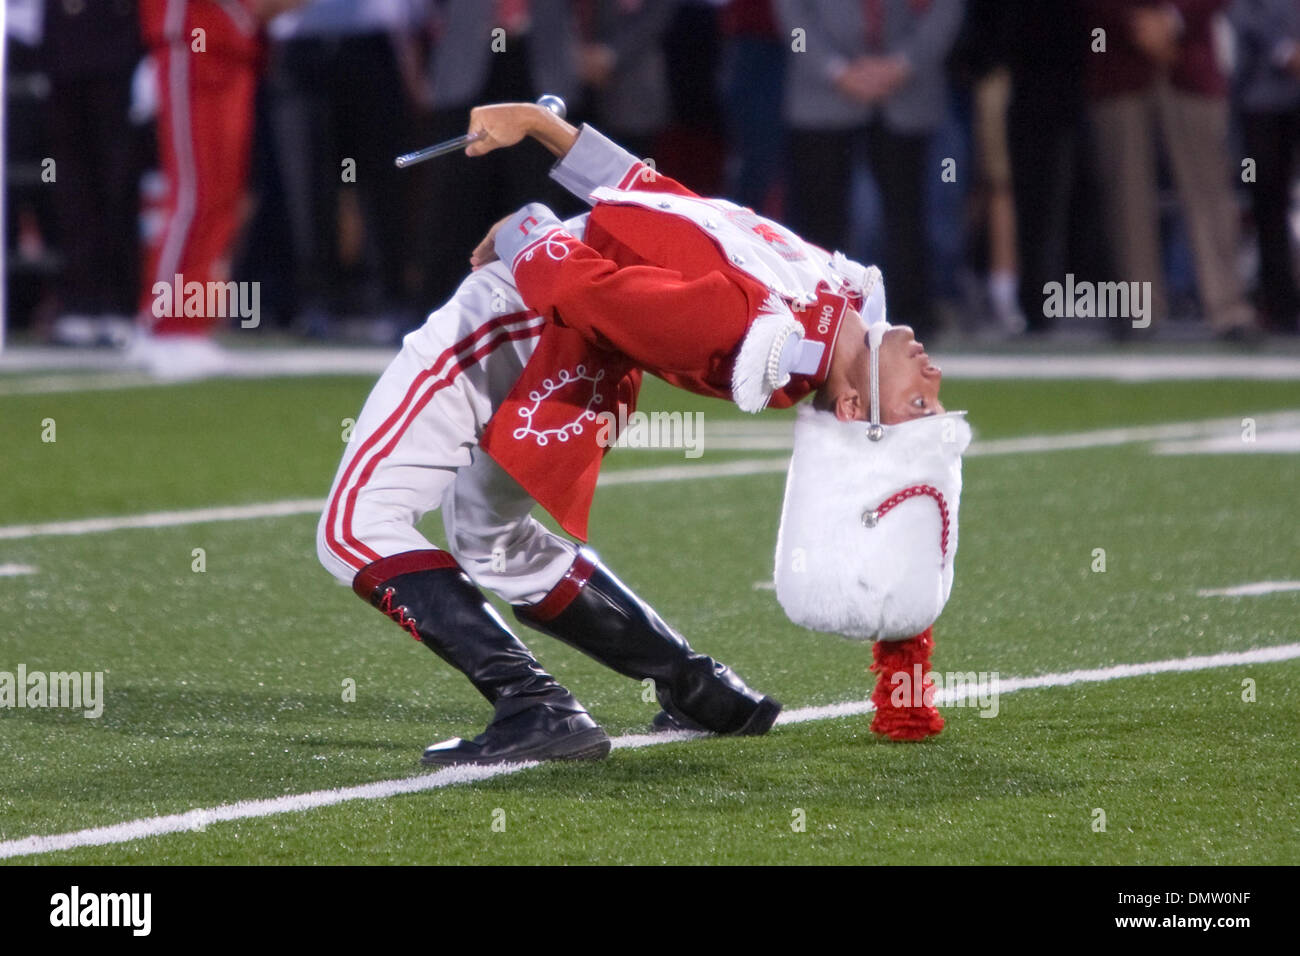 12-september-2009-the-ohio-state-band-drum-major-does-the-famous-back-DMW0NF.jpg